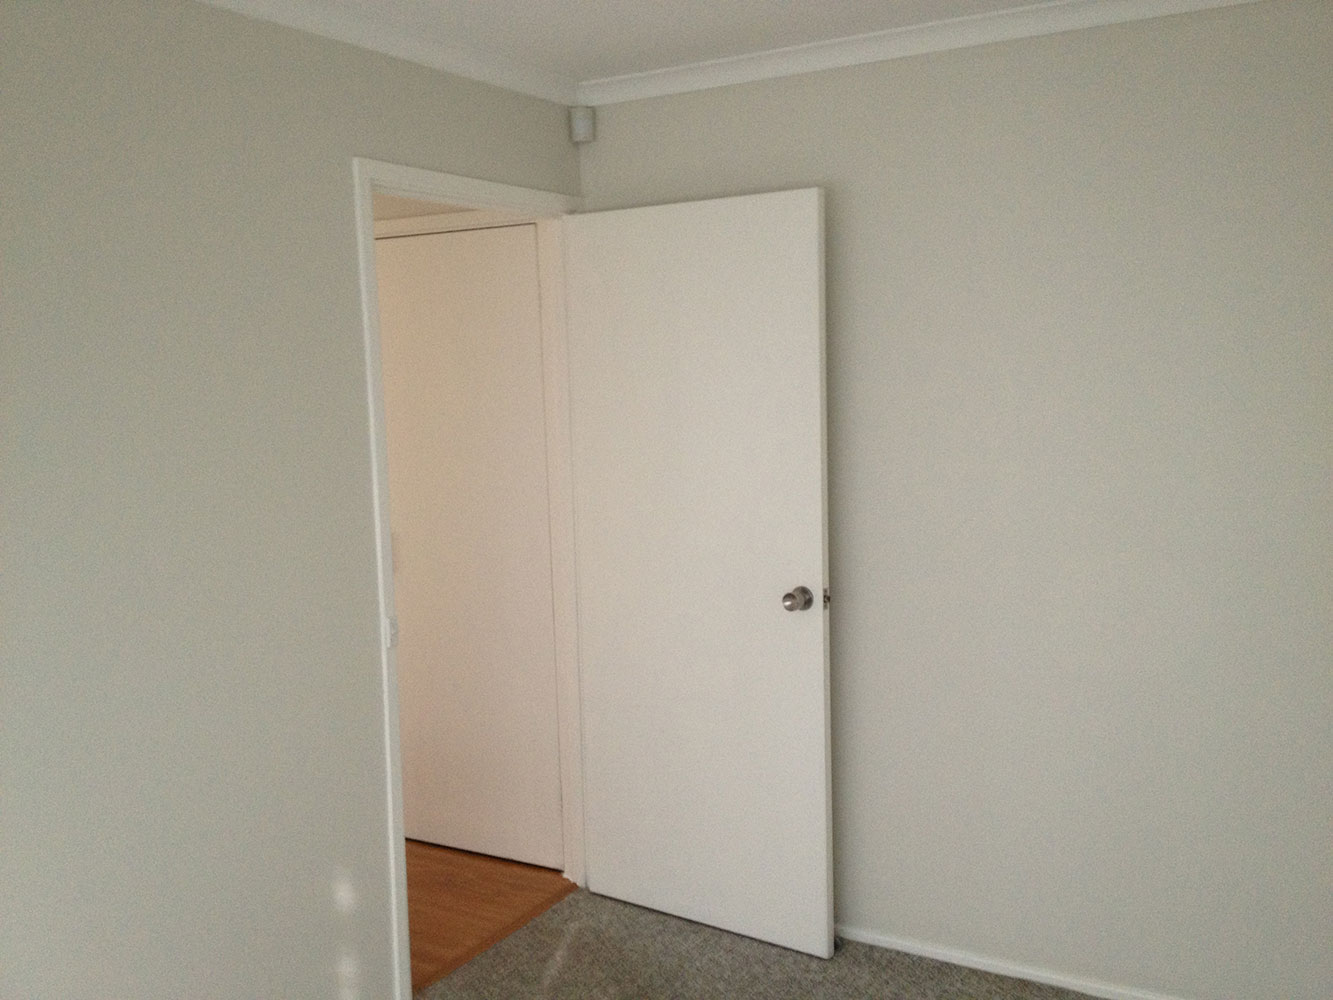 Standard Bedroom Entry With upgraded Alarm For extra Security